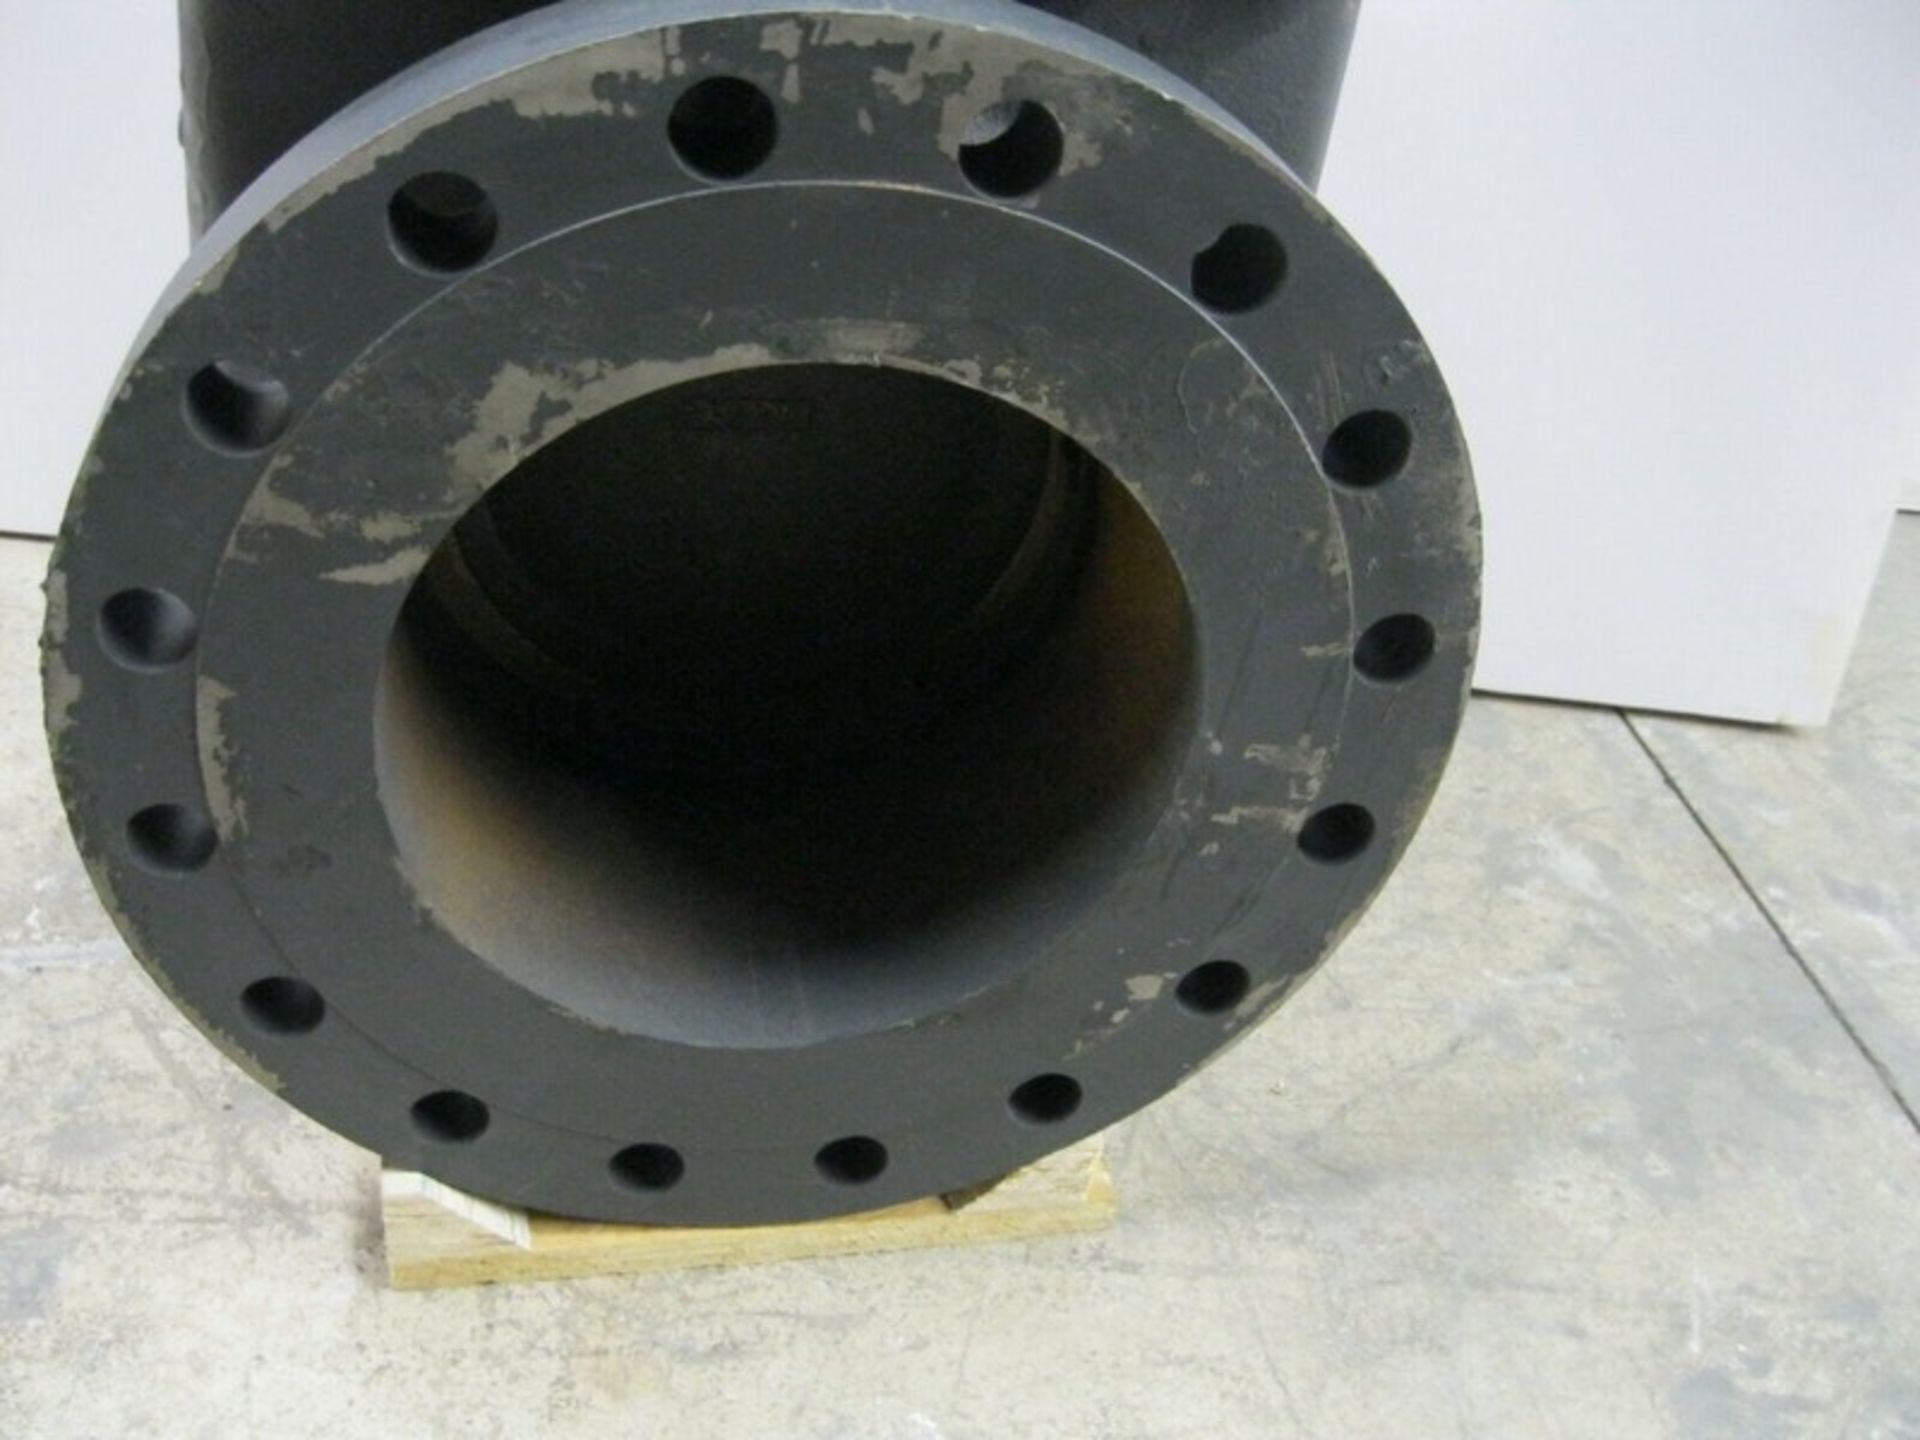 10" Flanged 300/350 PSI WWP Nibco F-697-0 Fire Main Gate Valve NEW (Loading Fee $50) (Located - Image 3 of 5